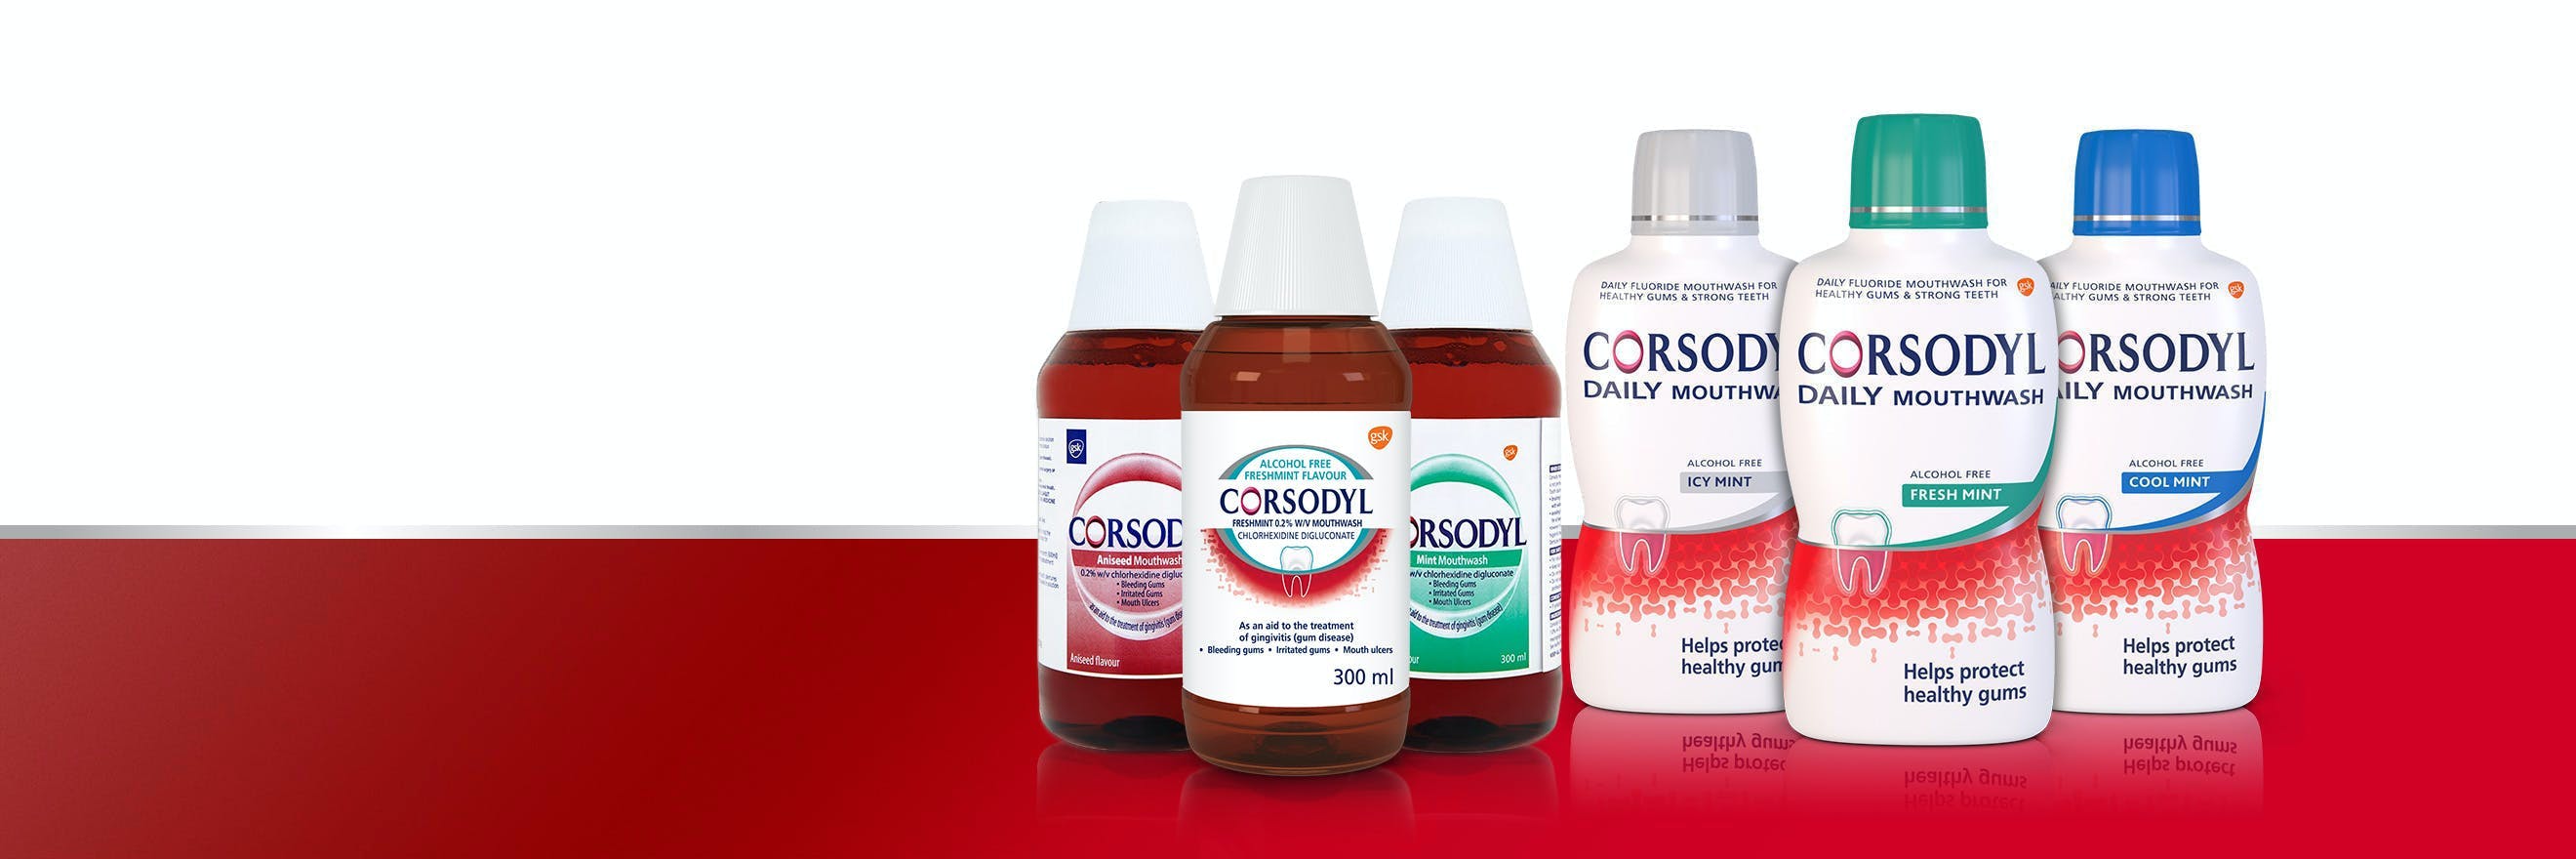 Six bottles of Corsodyl mouthwash and Corsodyl Daily Mouthwash, including original, alcohol free, and mint